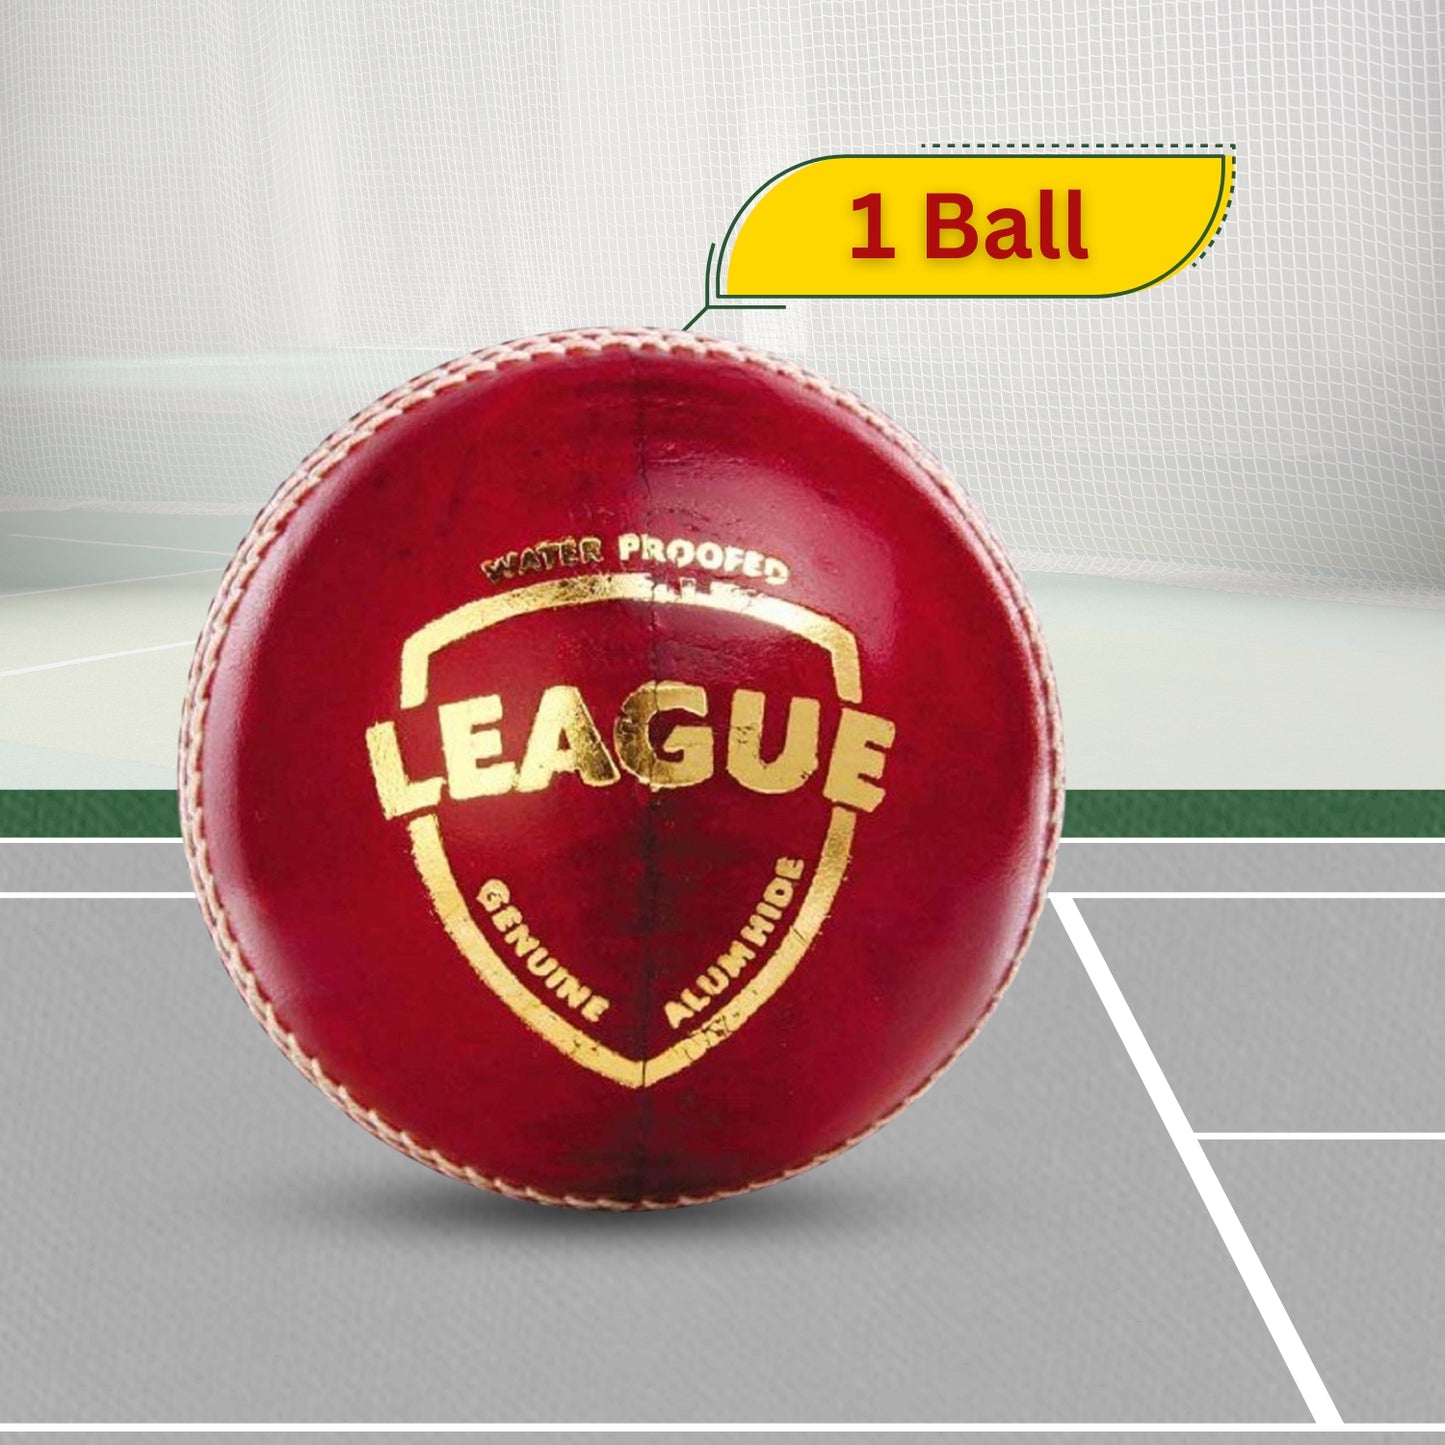 SG League Cricket Ball for Adult , Red - 1PC - Best Price online Prokicksports.com